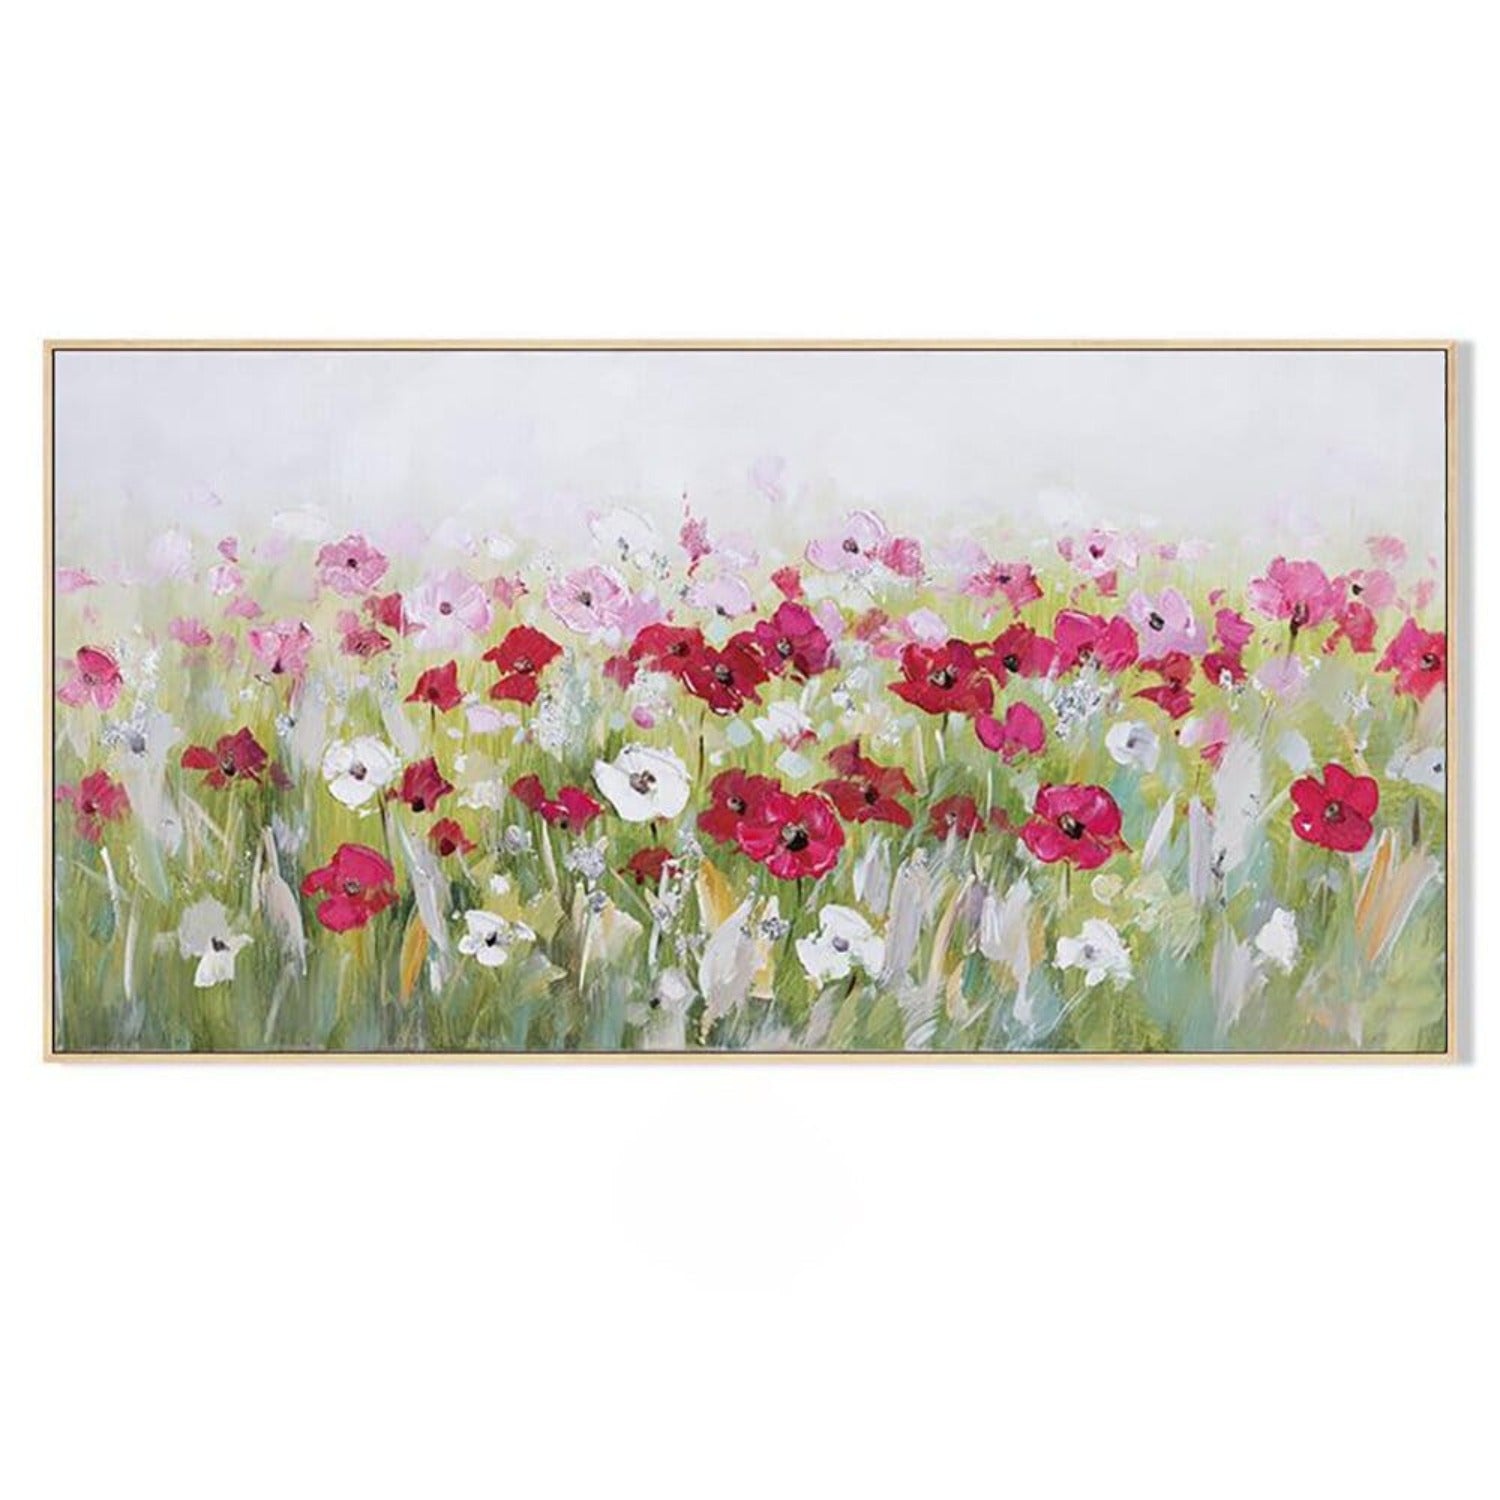 Abstract Spring Flowers 100% Hand Painted Wall Art